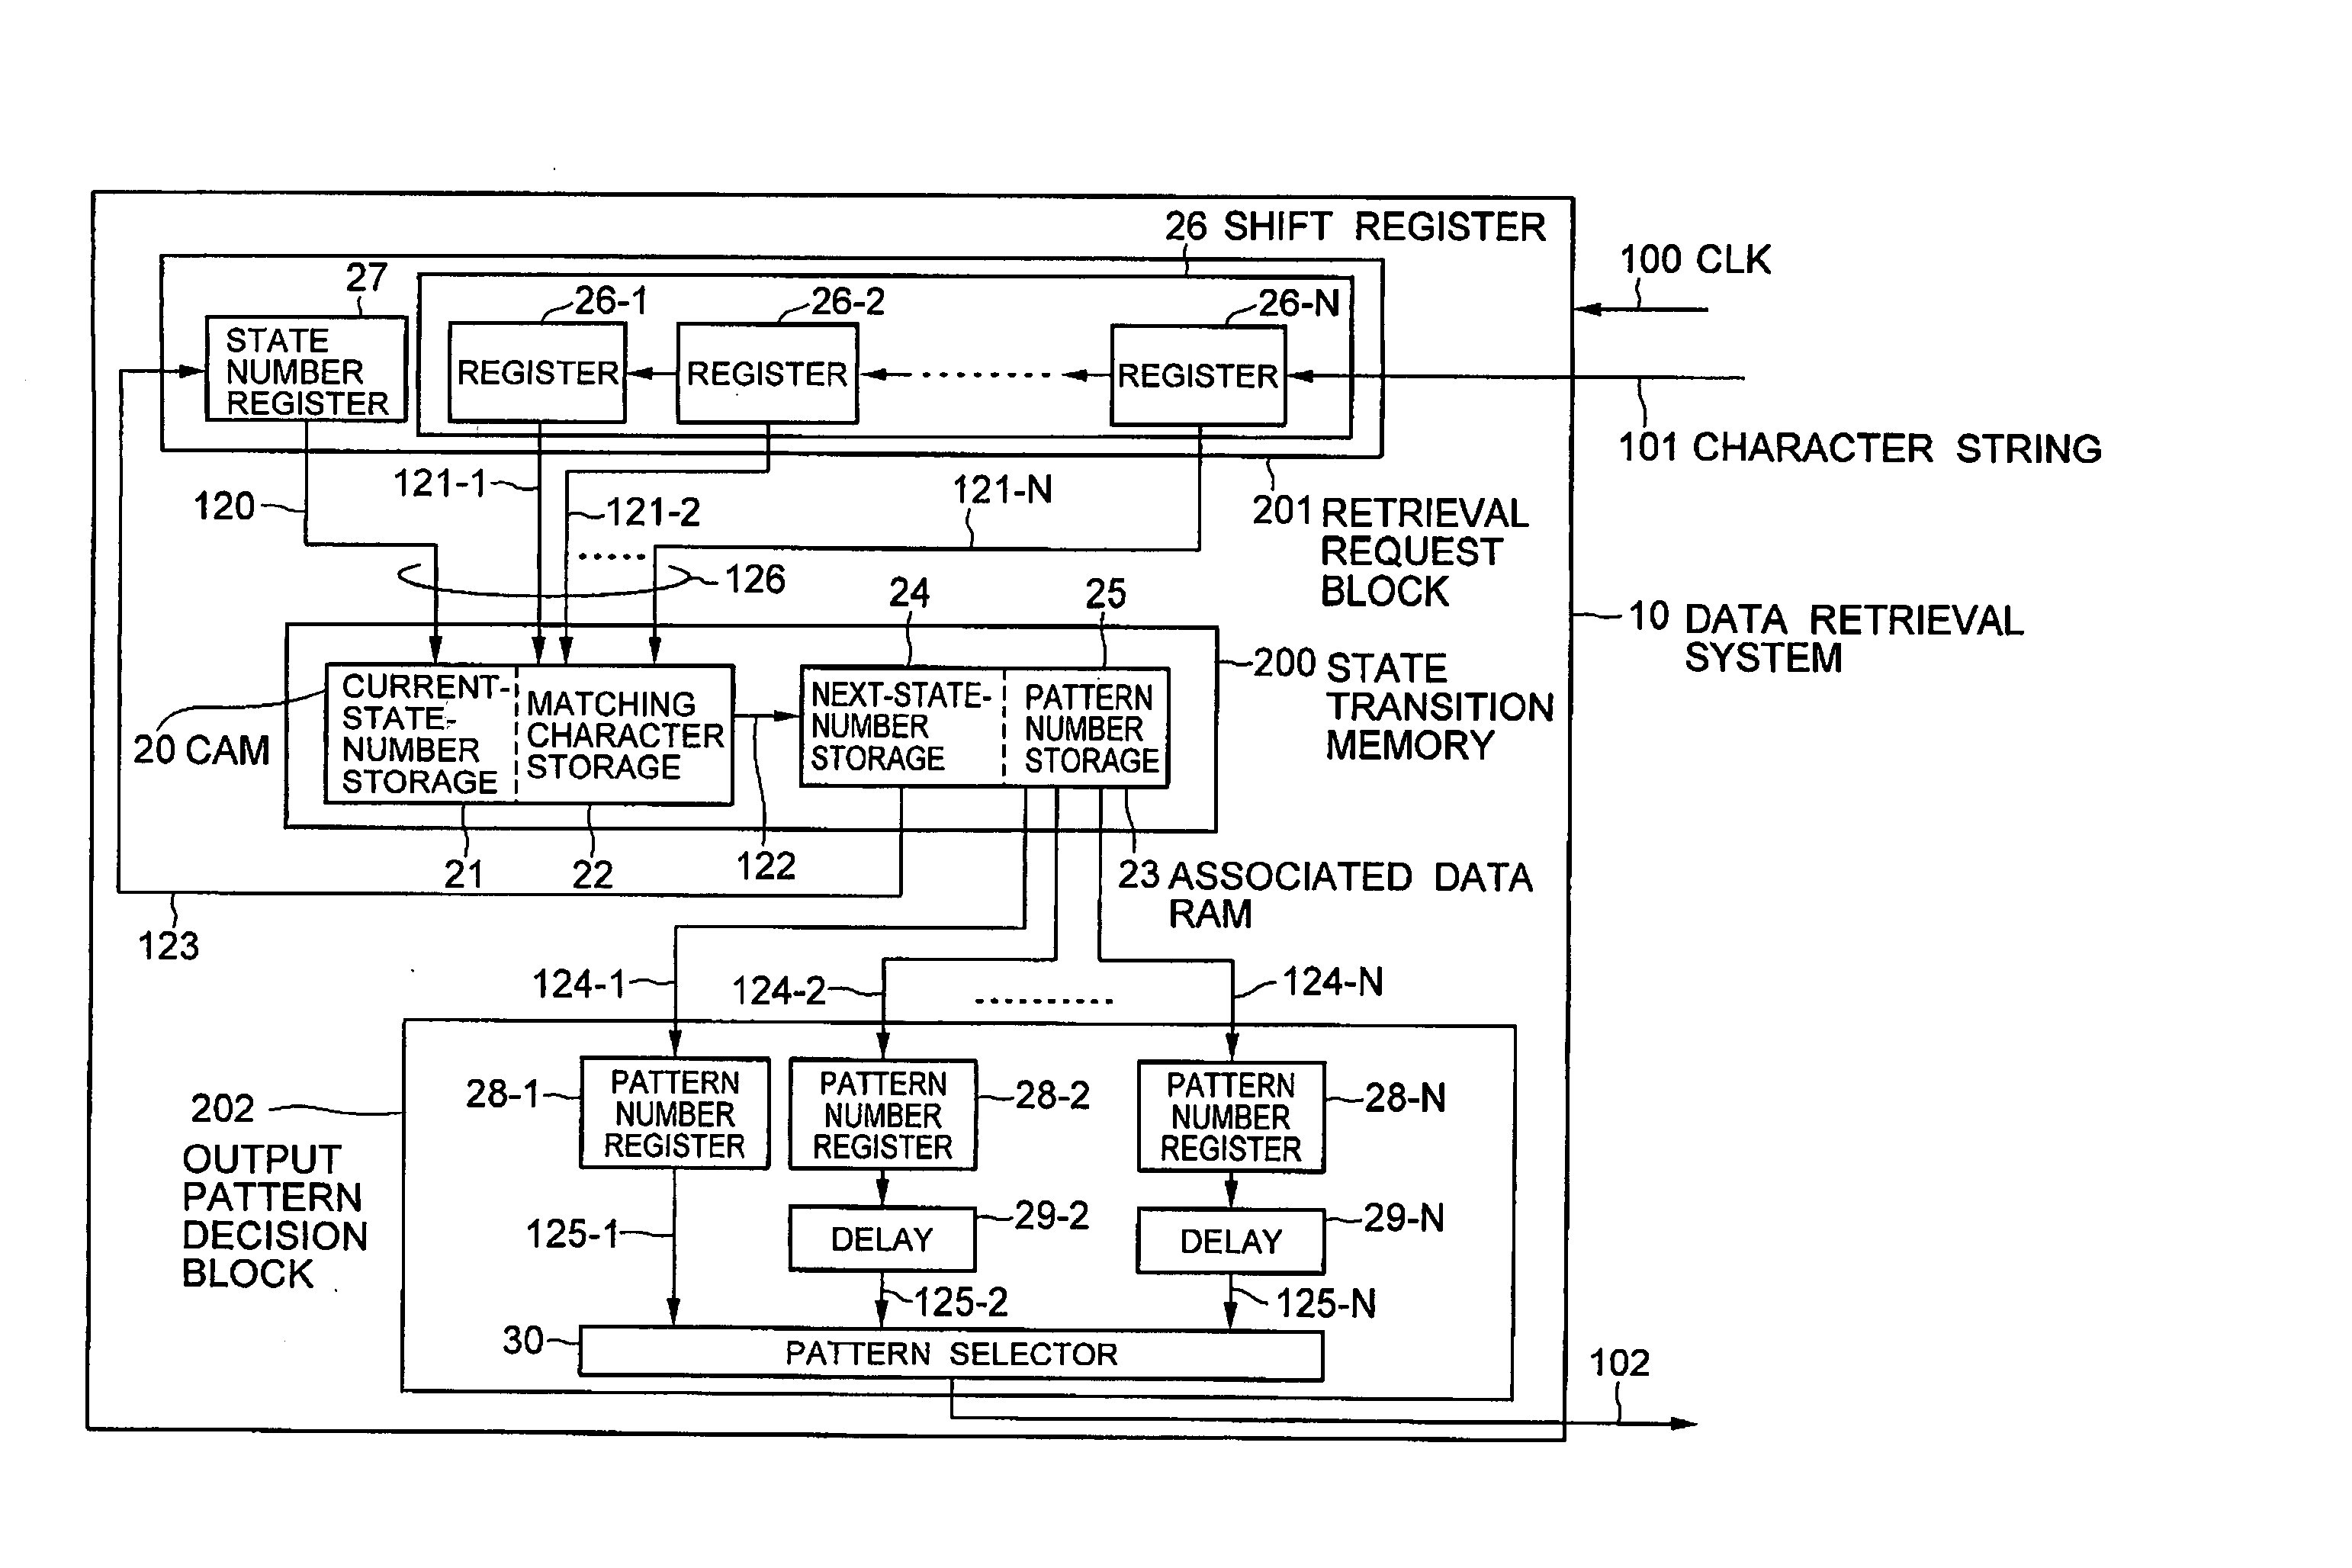 Method and system for retrieving a data pattern